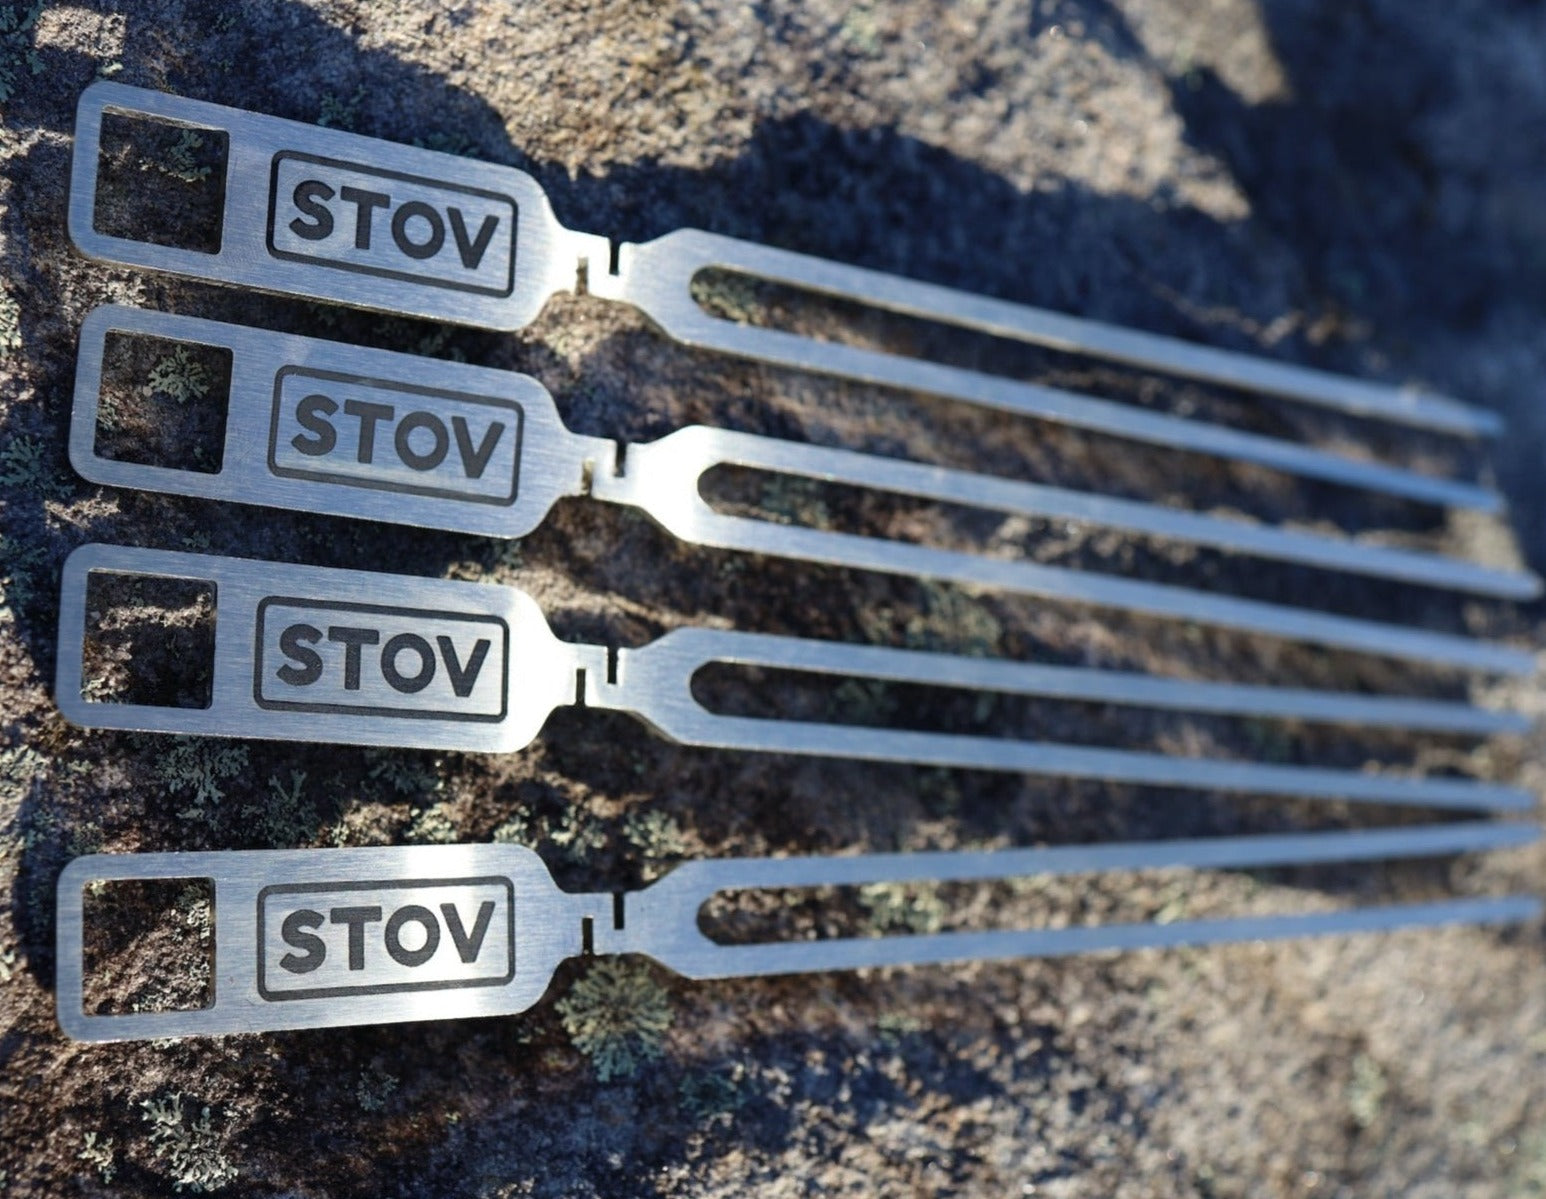 Made out of high quality 304 stainless steel, these metal skewers are made for a lifetime.